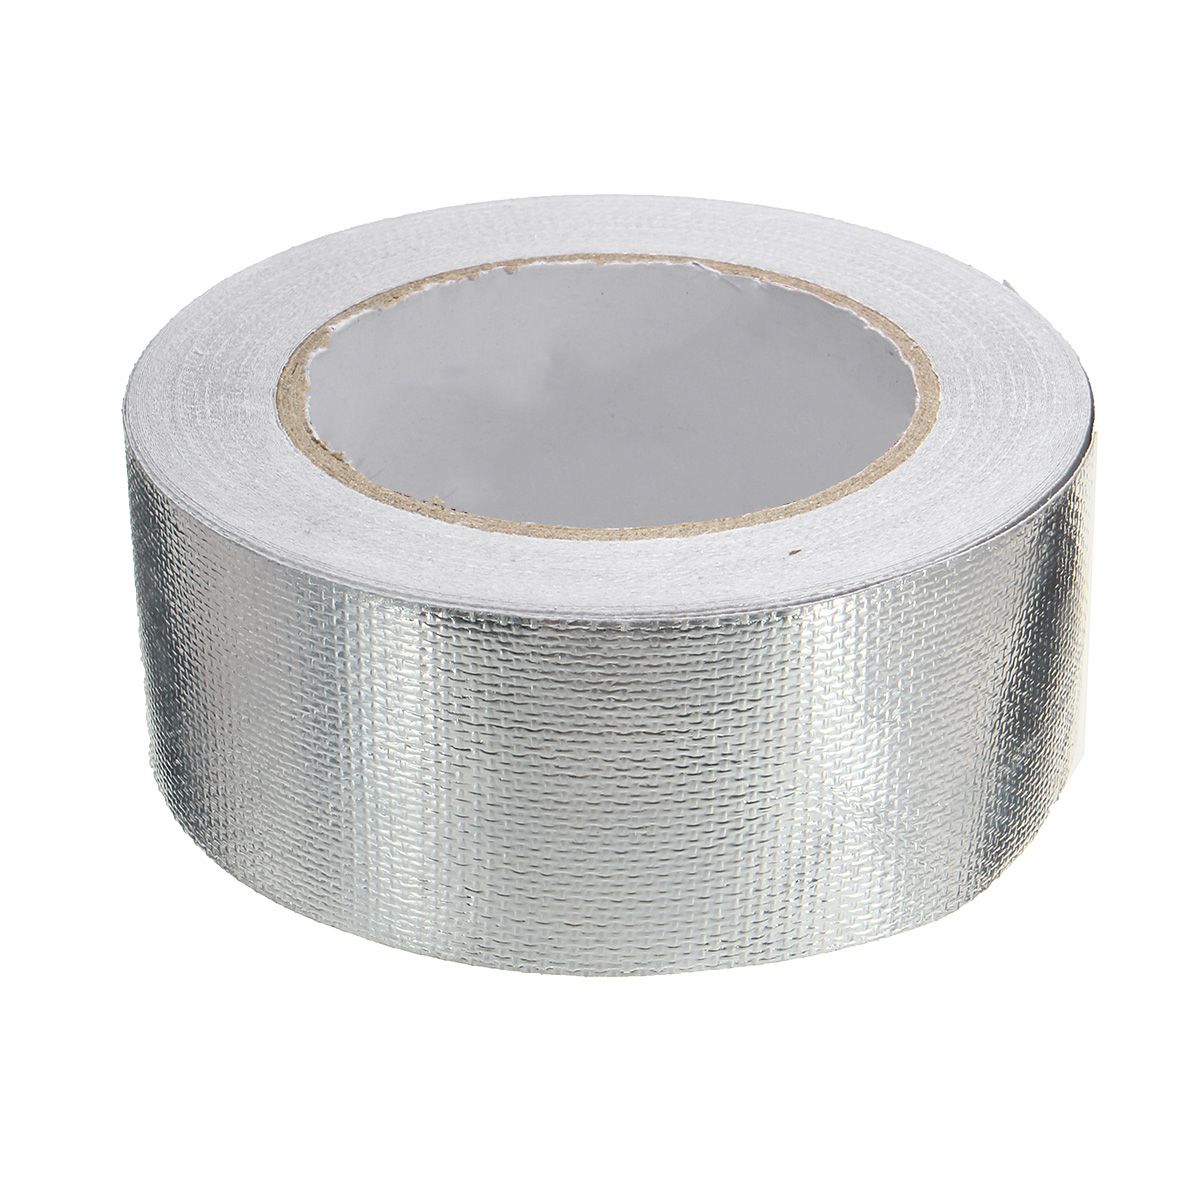 Aluminum-Reinforced-Tape-Heat-Shield-Adhesive-Backed-Resistant-Wrap-Intake-1149250